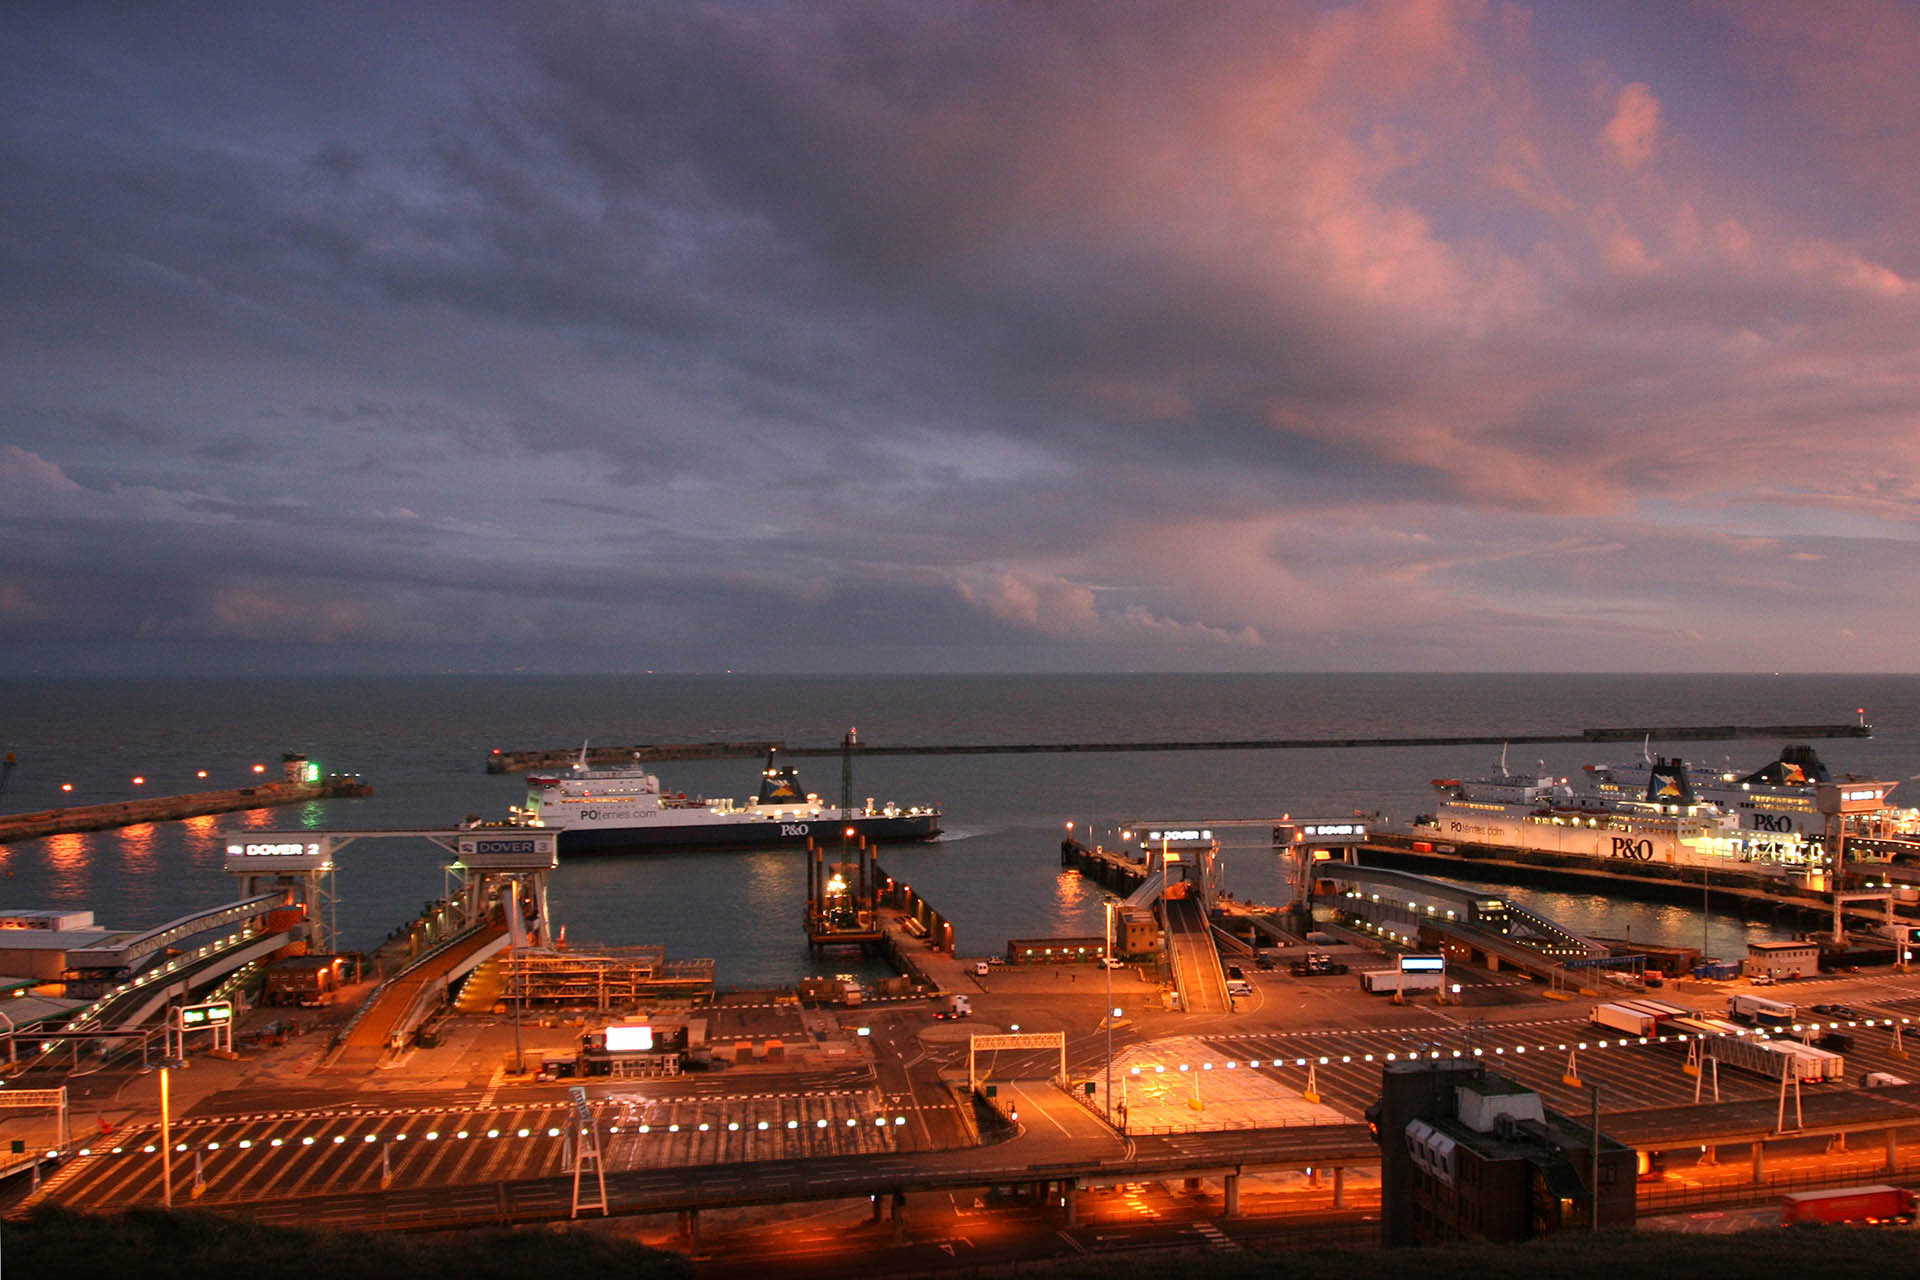 The Port of Dover at night